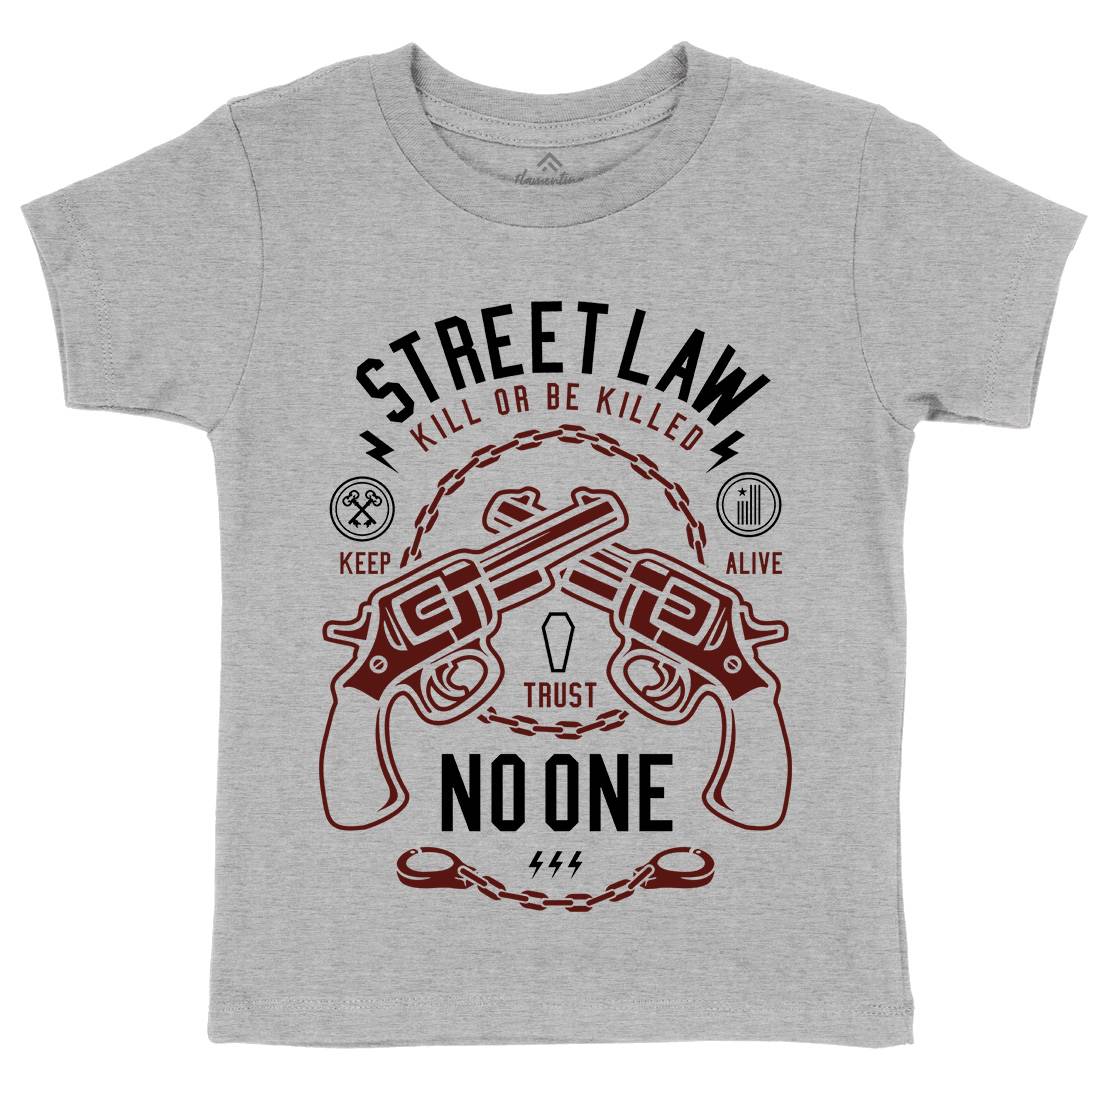 Street Law Kids Organic Crew Neck T-Shirt Quotes A286